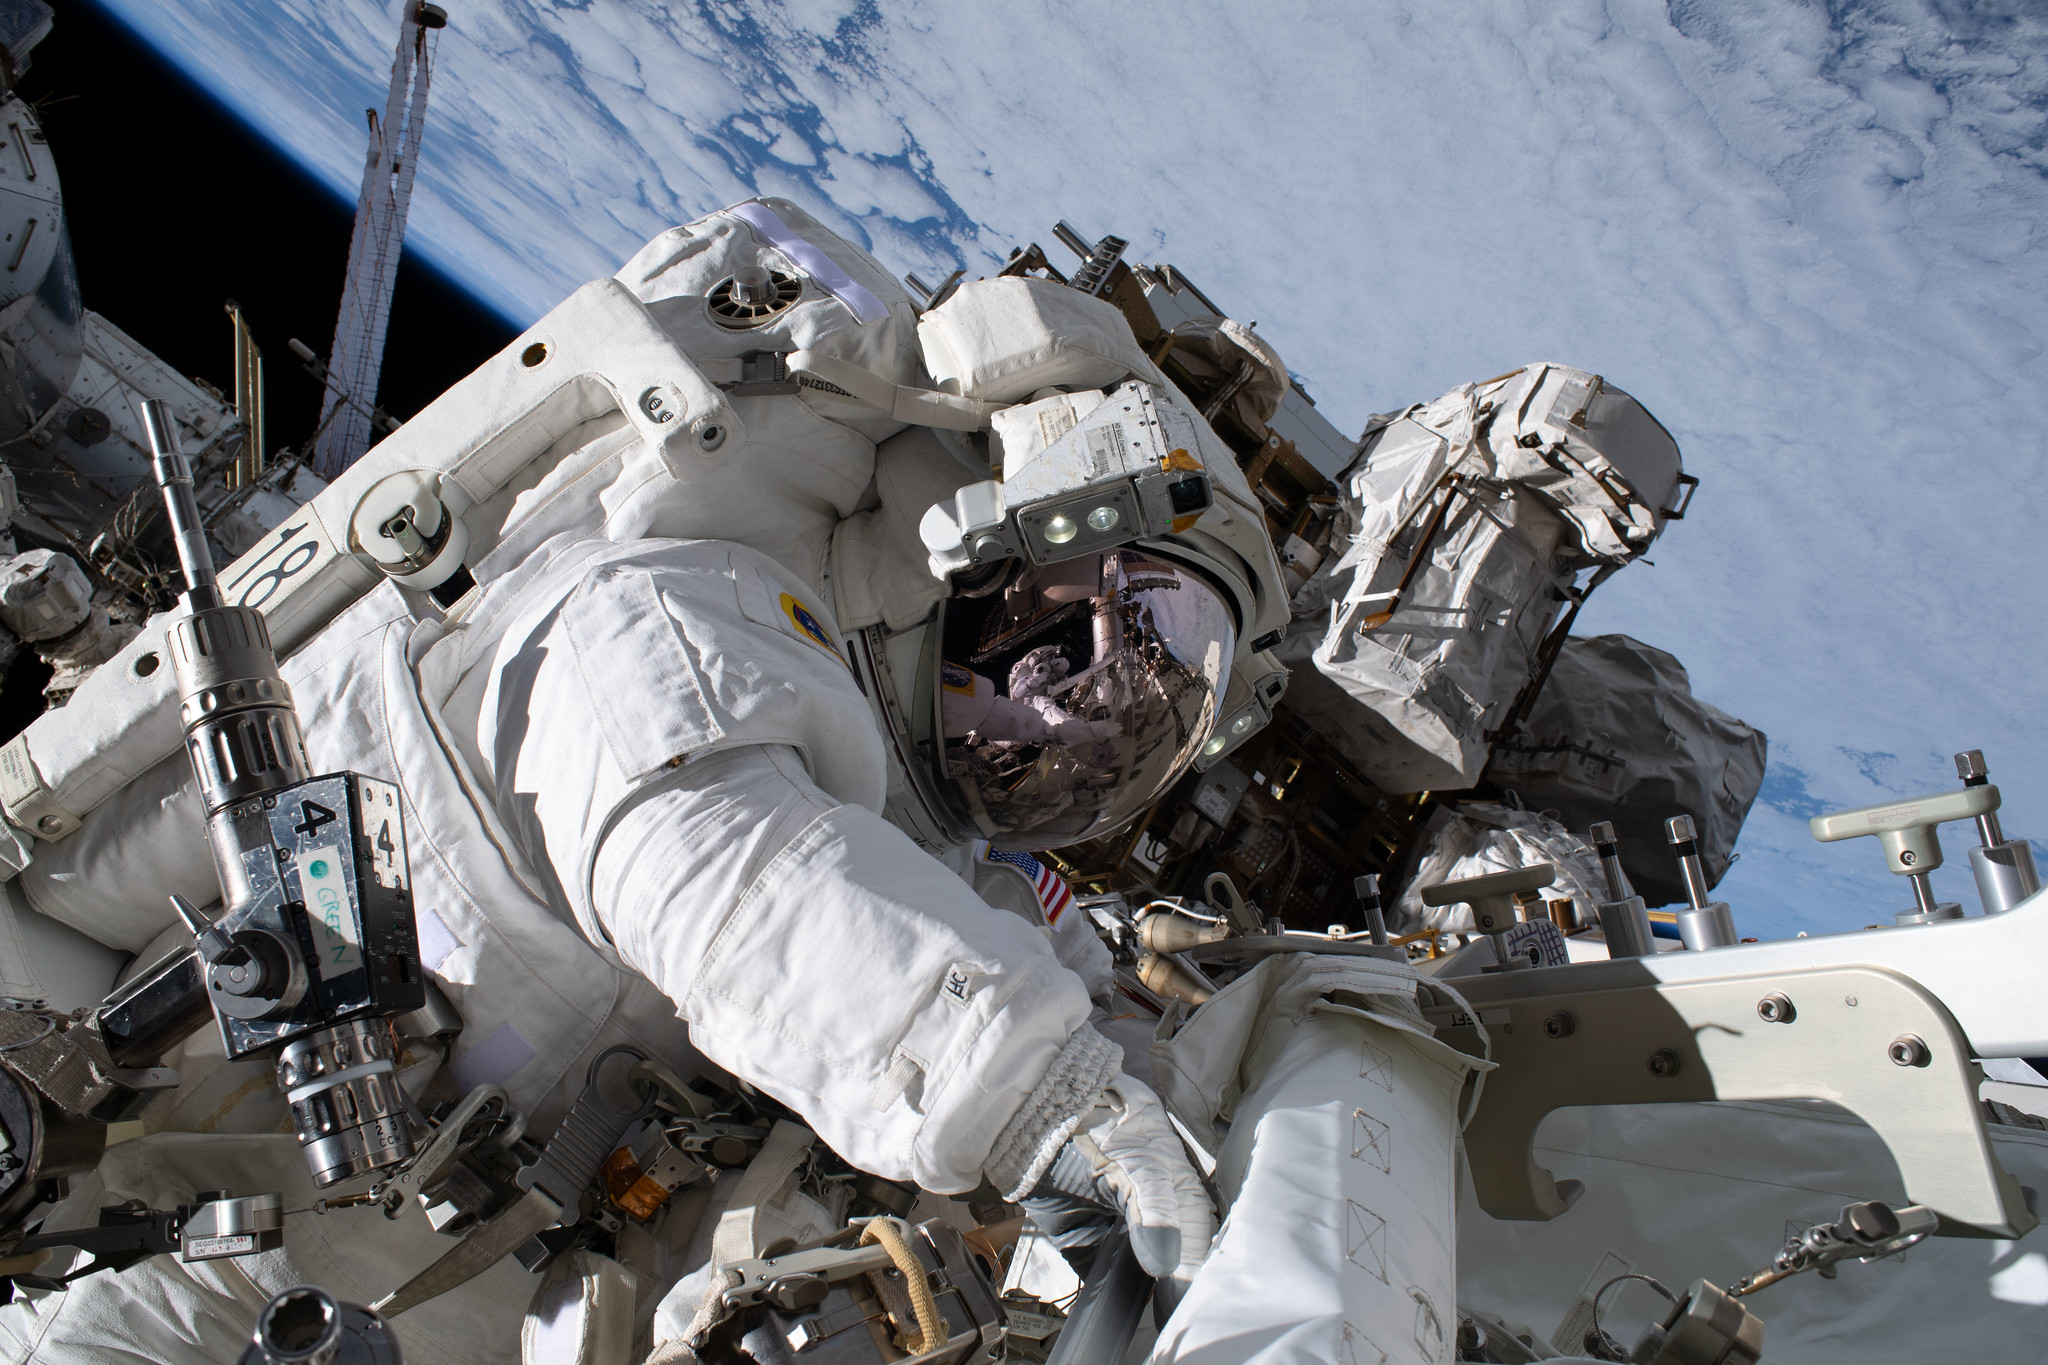  (Jan. 20, 2023) u002du002d- NASA astronaut and Expedition 68 Flight Engineer Nicole Mann is pictured in her Extravehicular Mobility Unit, or spacesuit, during her first spacewalk.